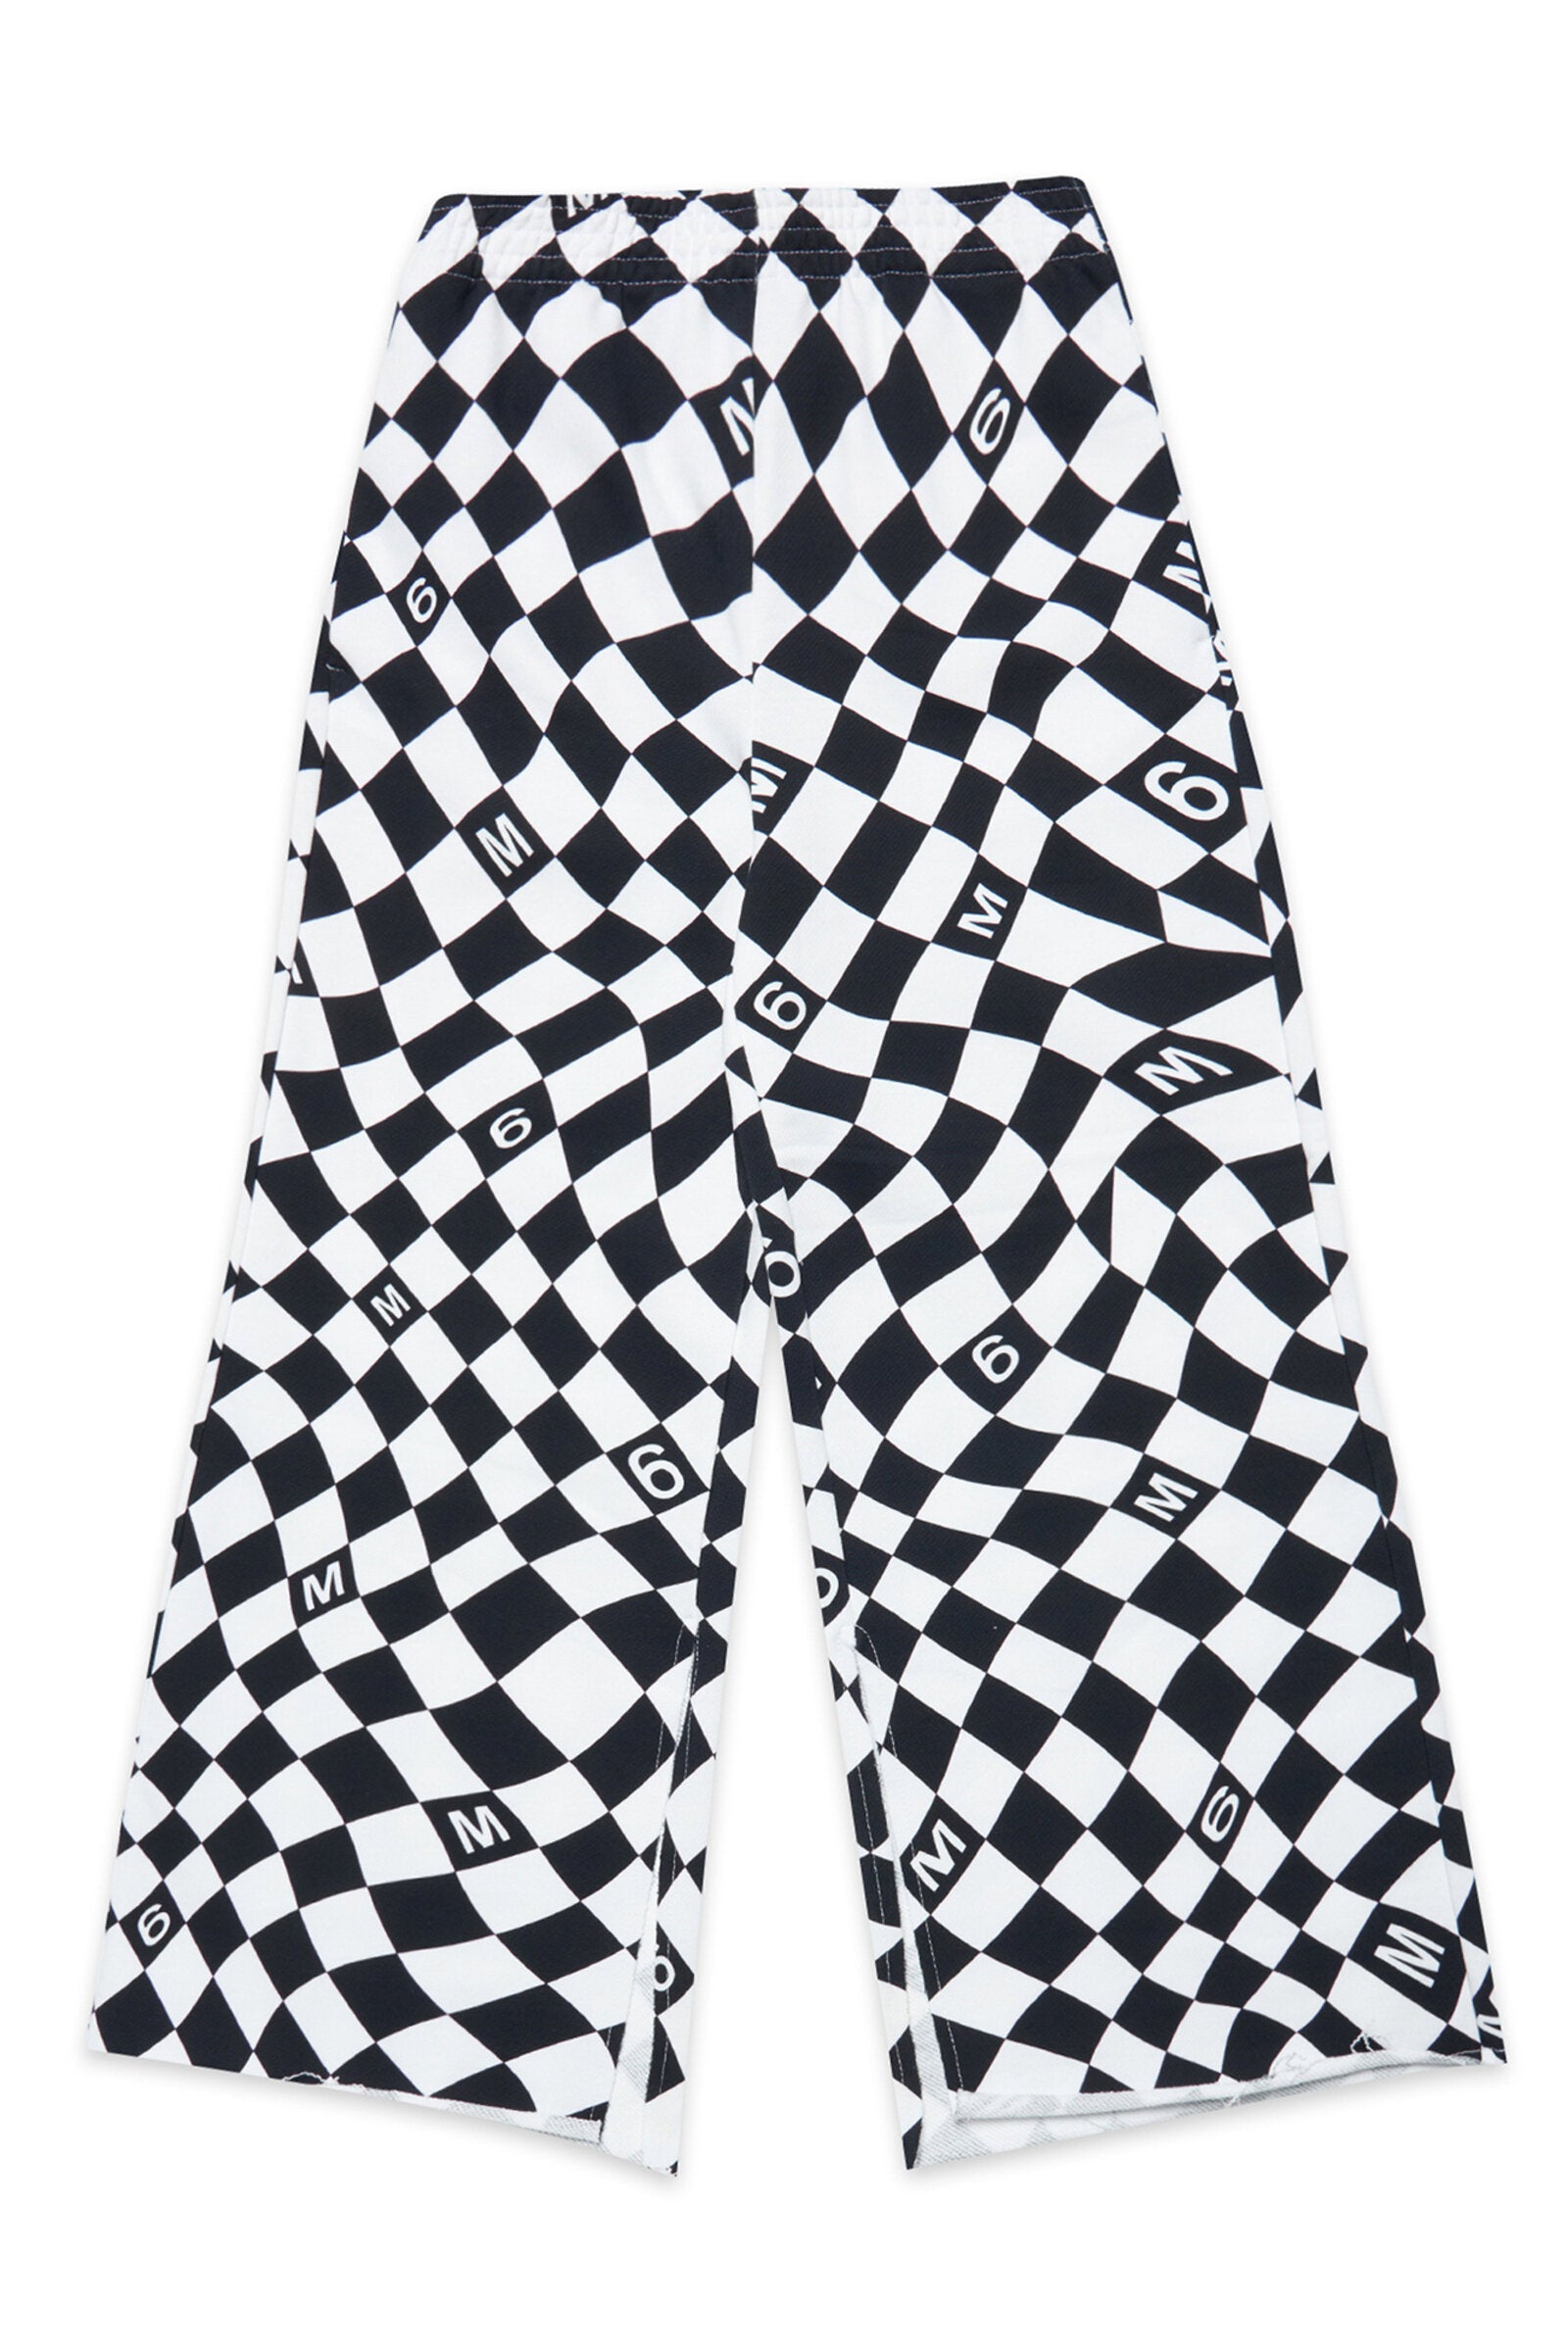 Black and white wide fleece pants with chequered pattern